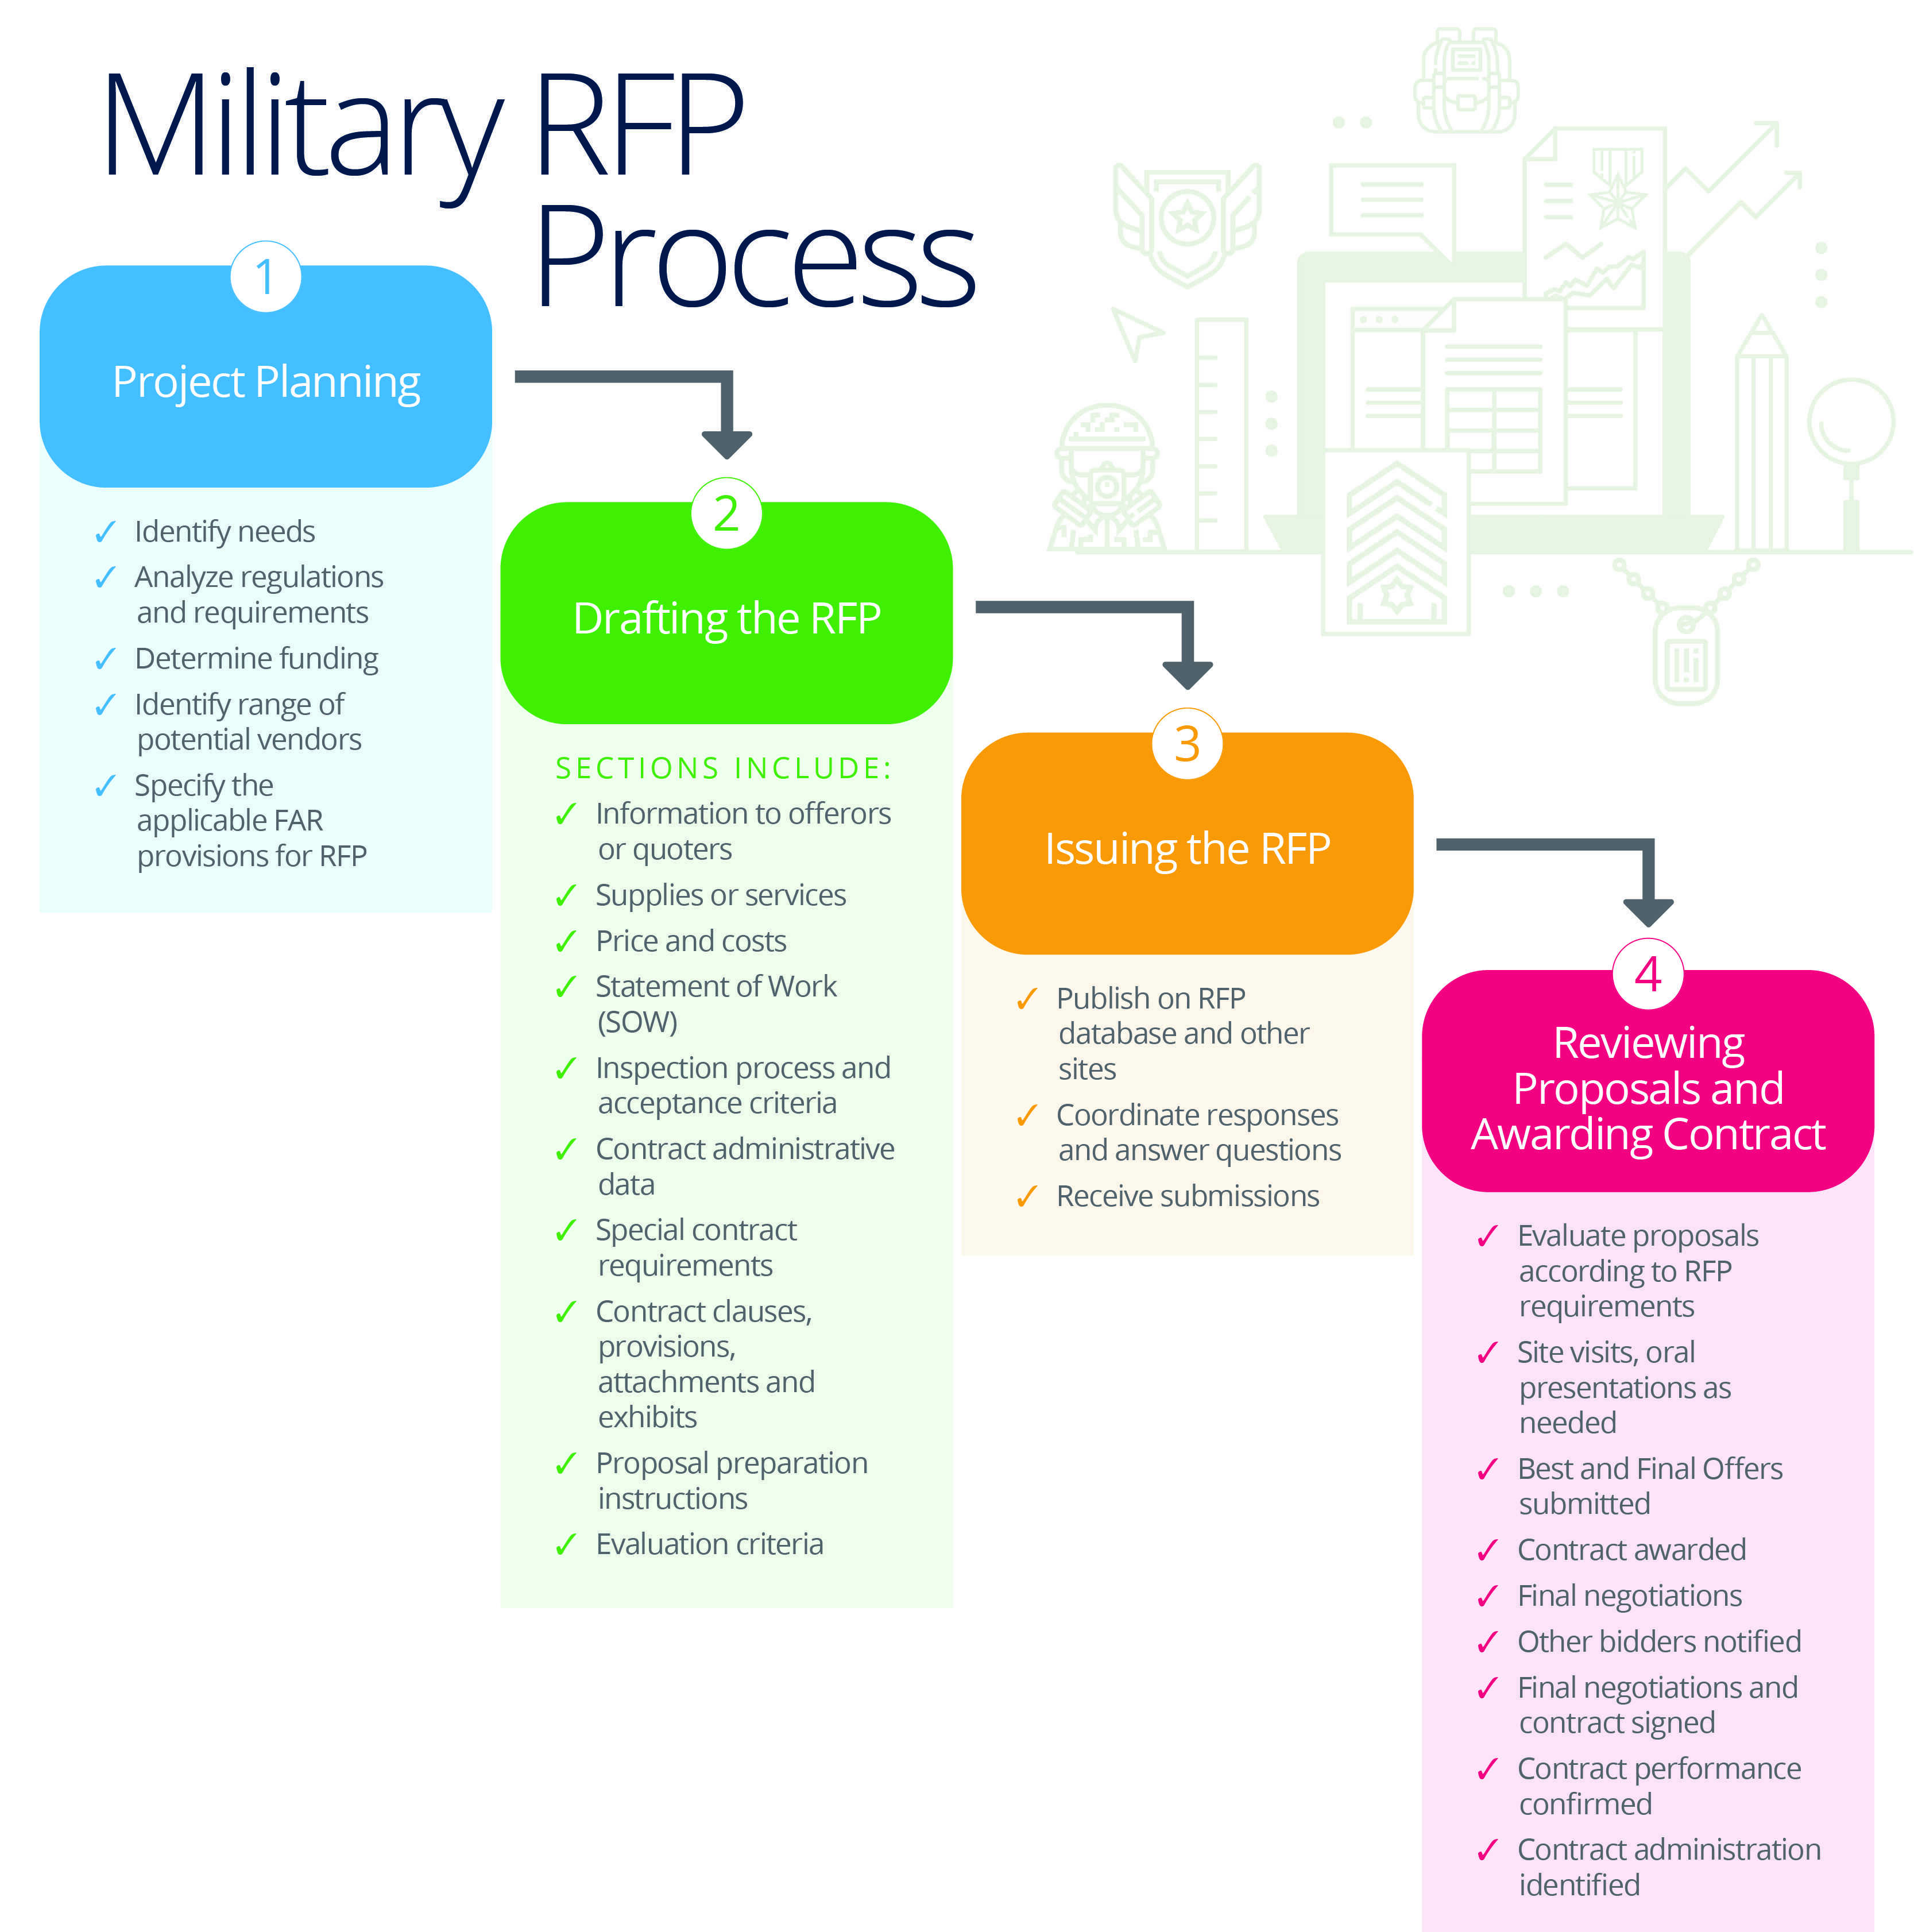 Military request for proposal process flowchart